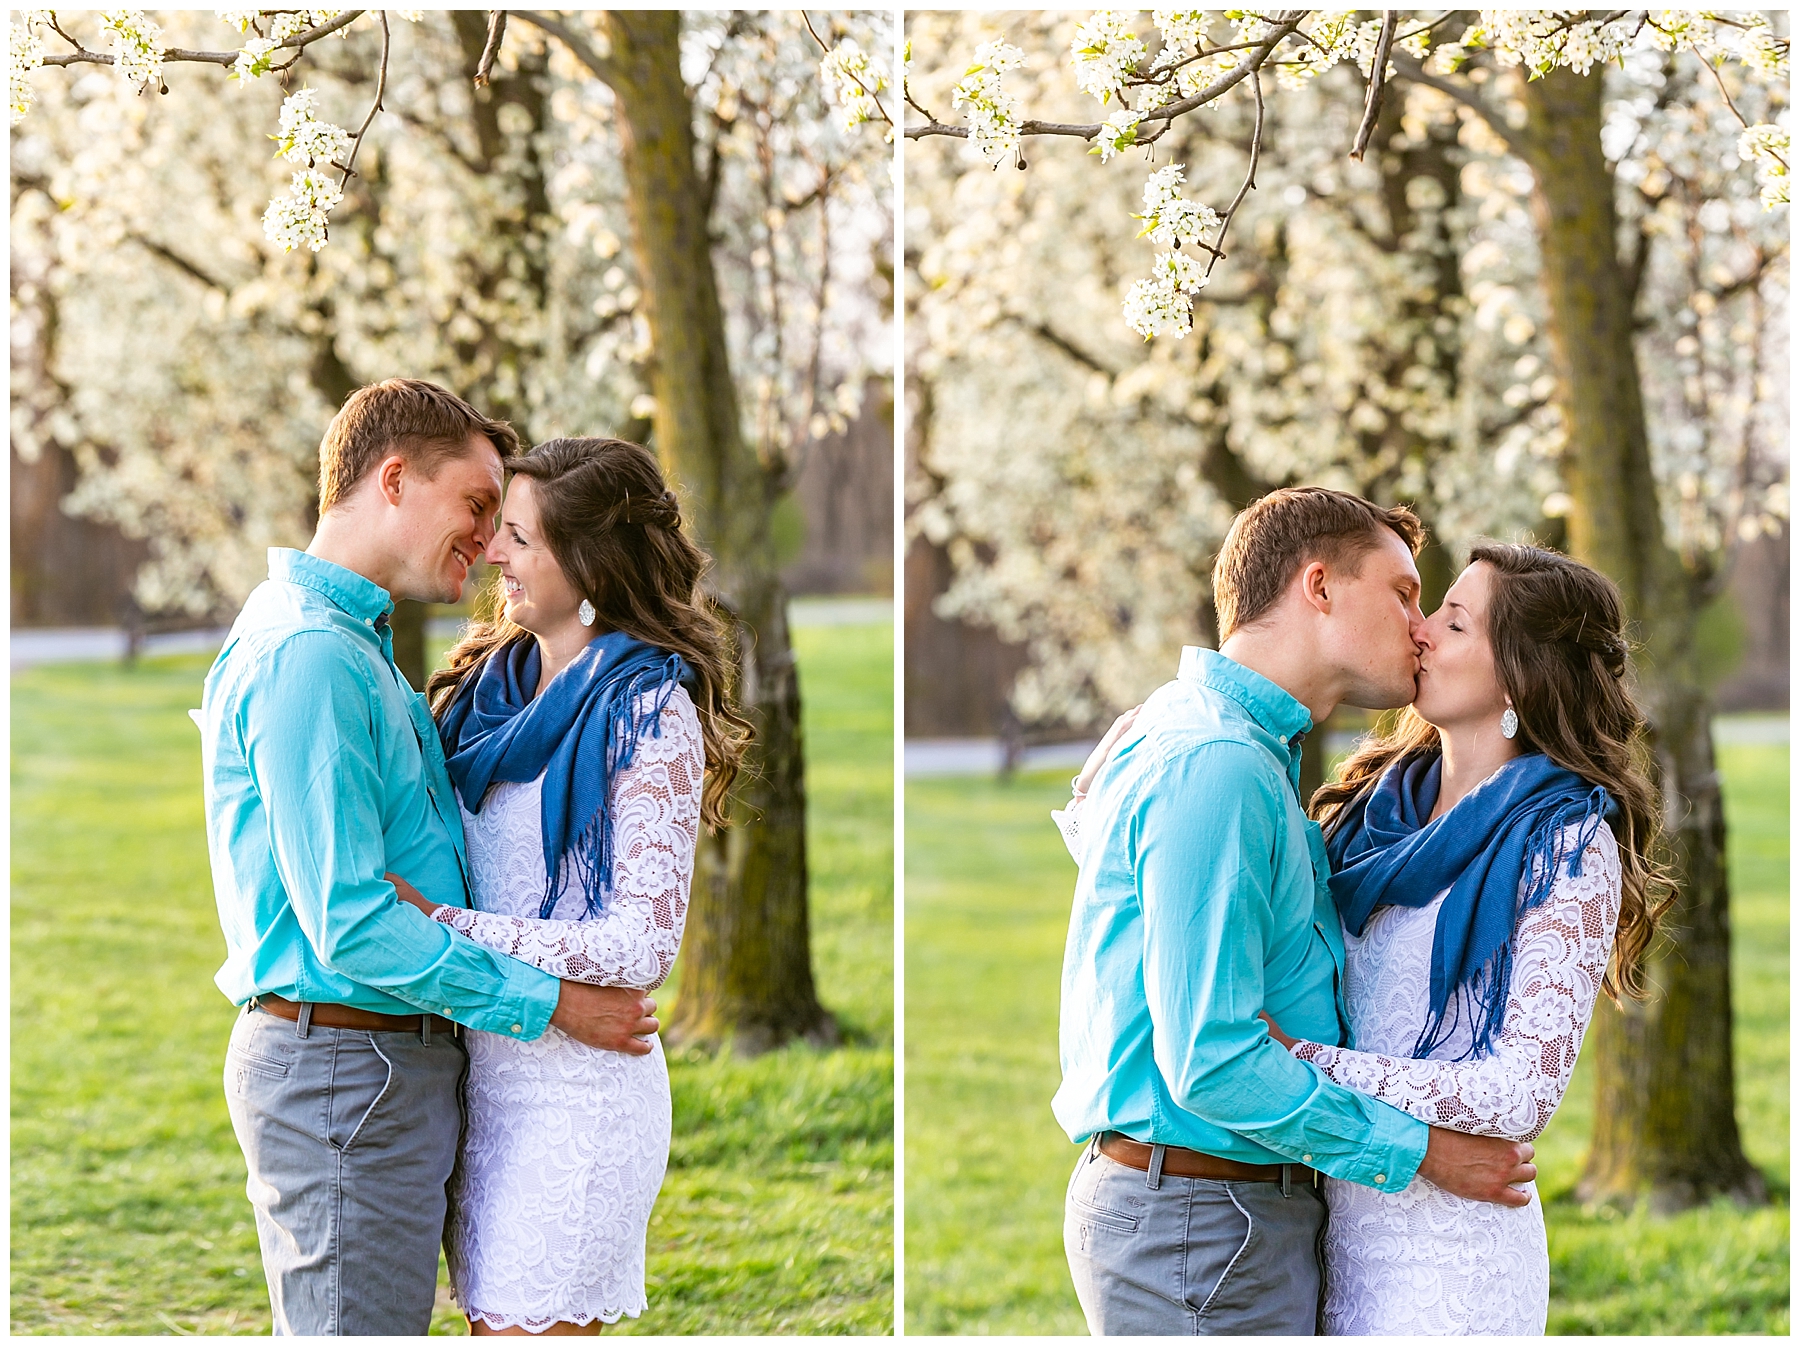 Chelsea Phil Private Estate Engagement Living Radiant Photography photos color_0023.jpg